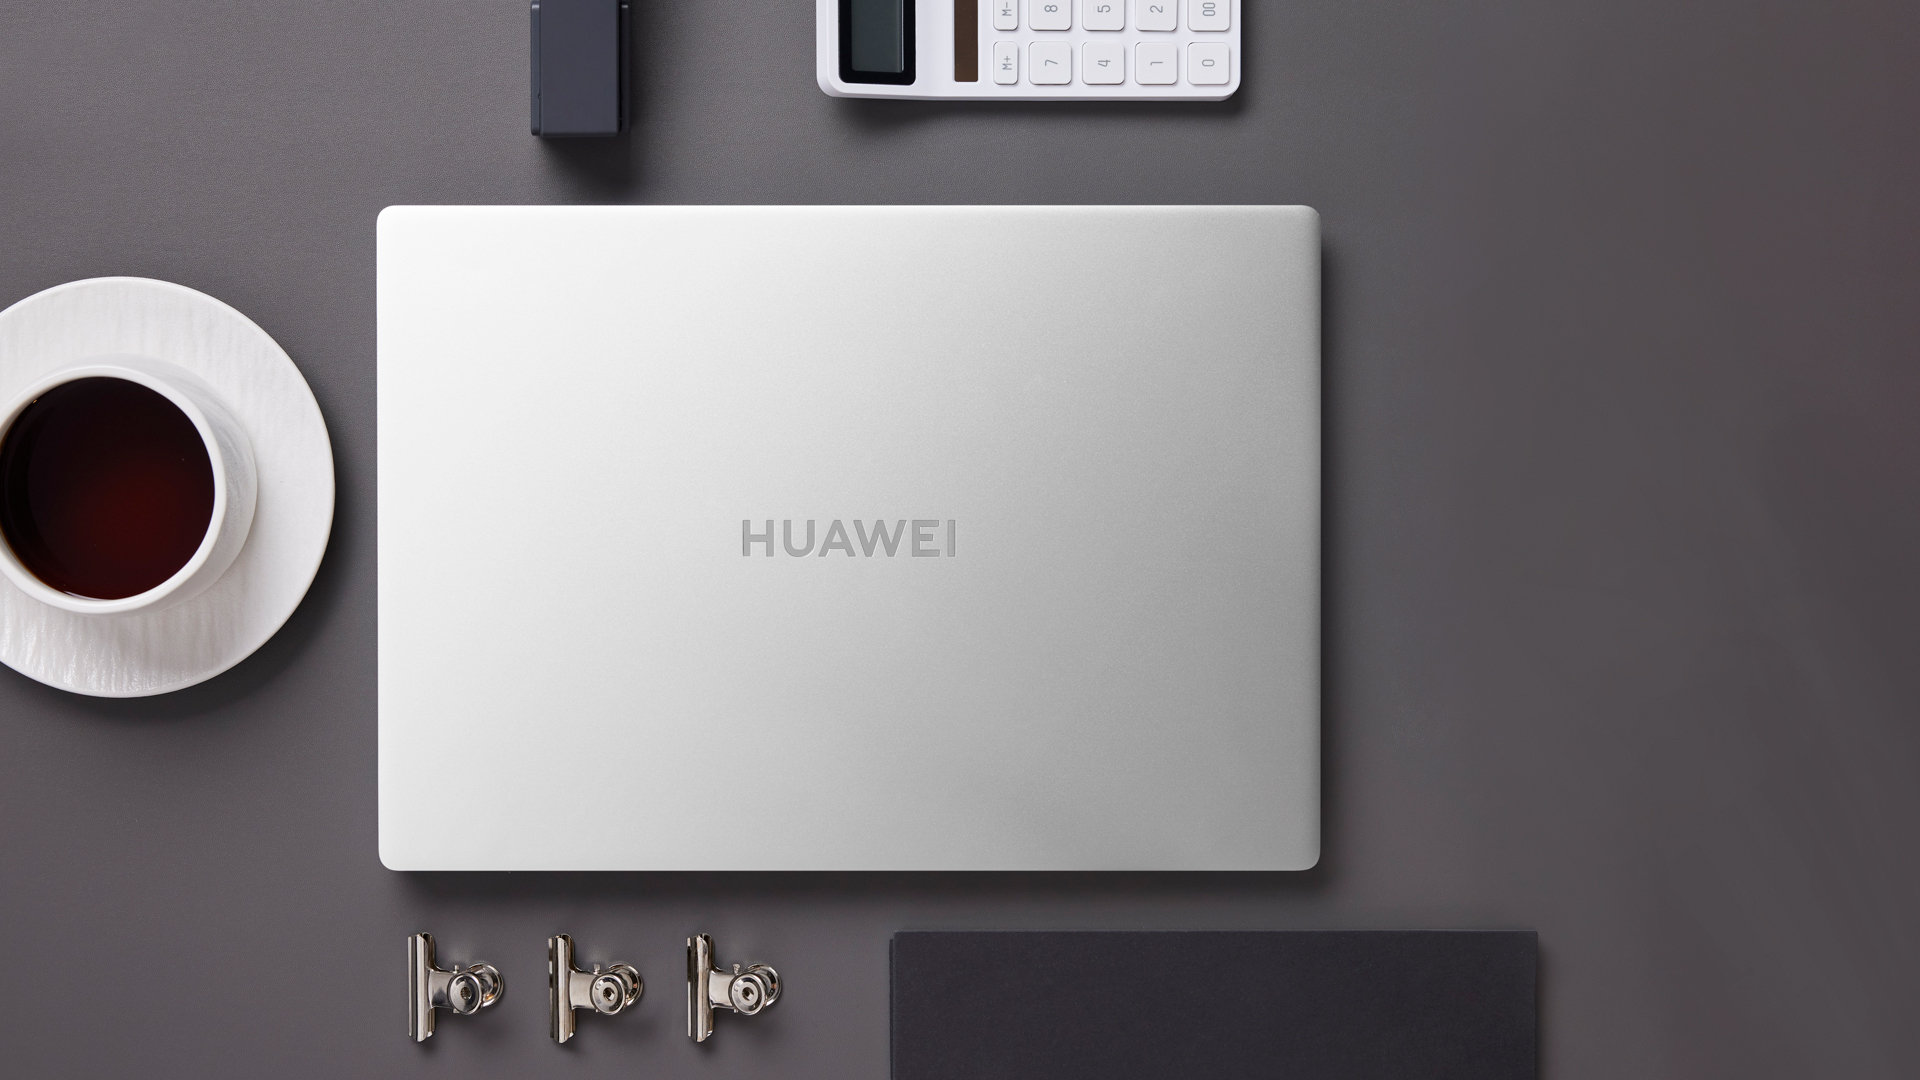 Four things to like about the Huawei Matebook D16 with Intel core i5